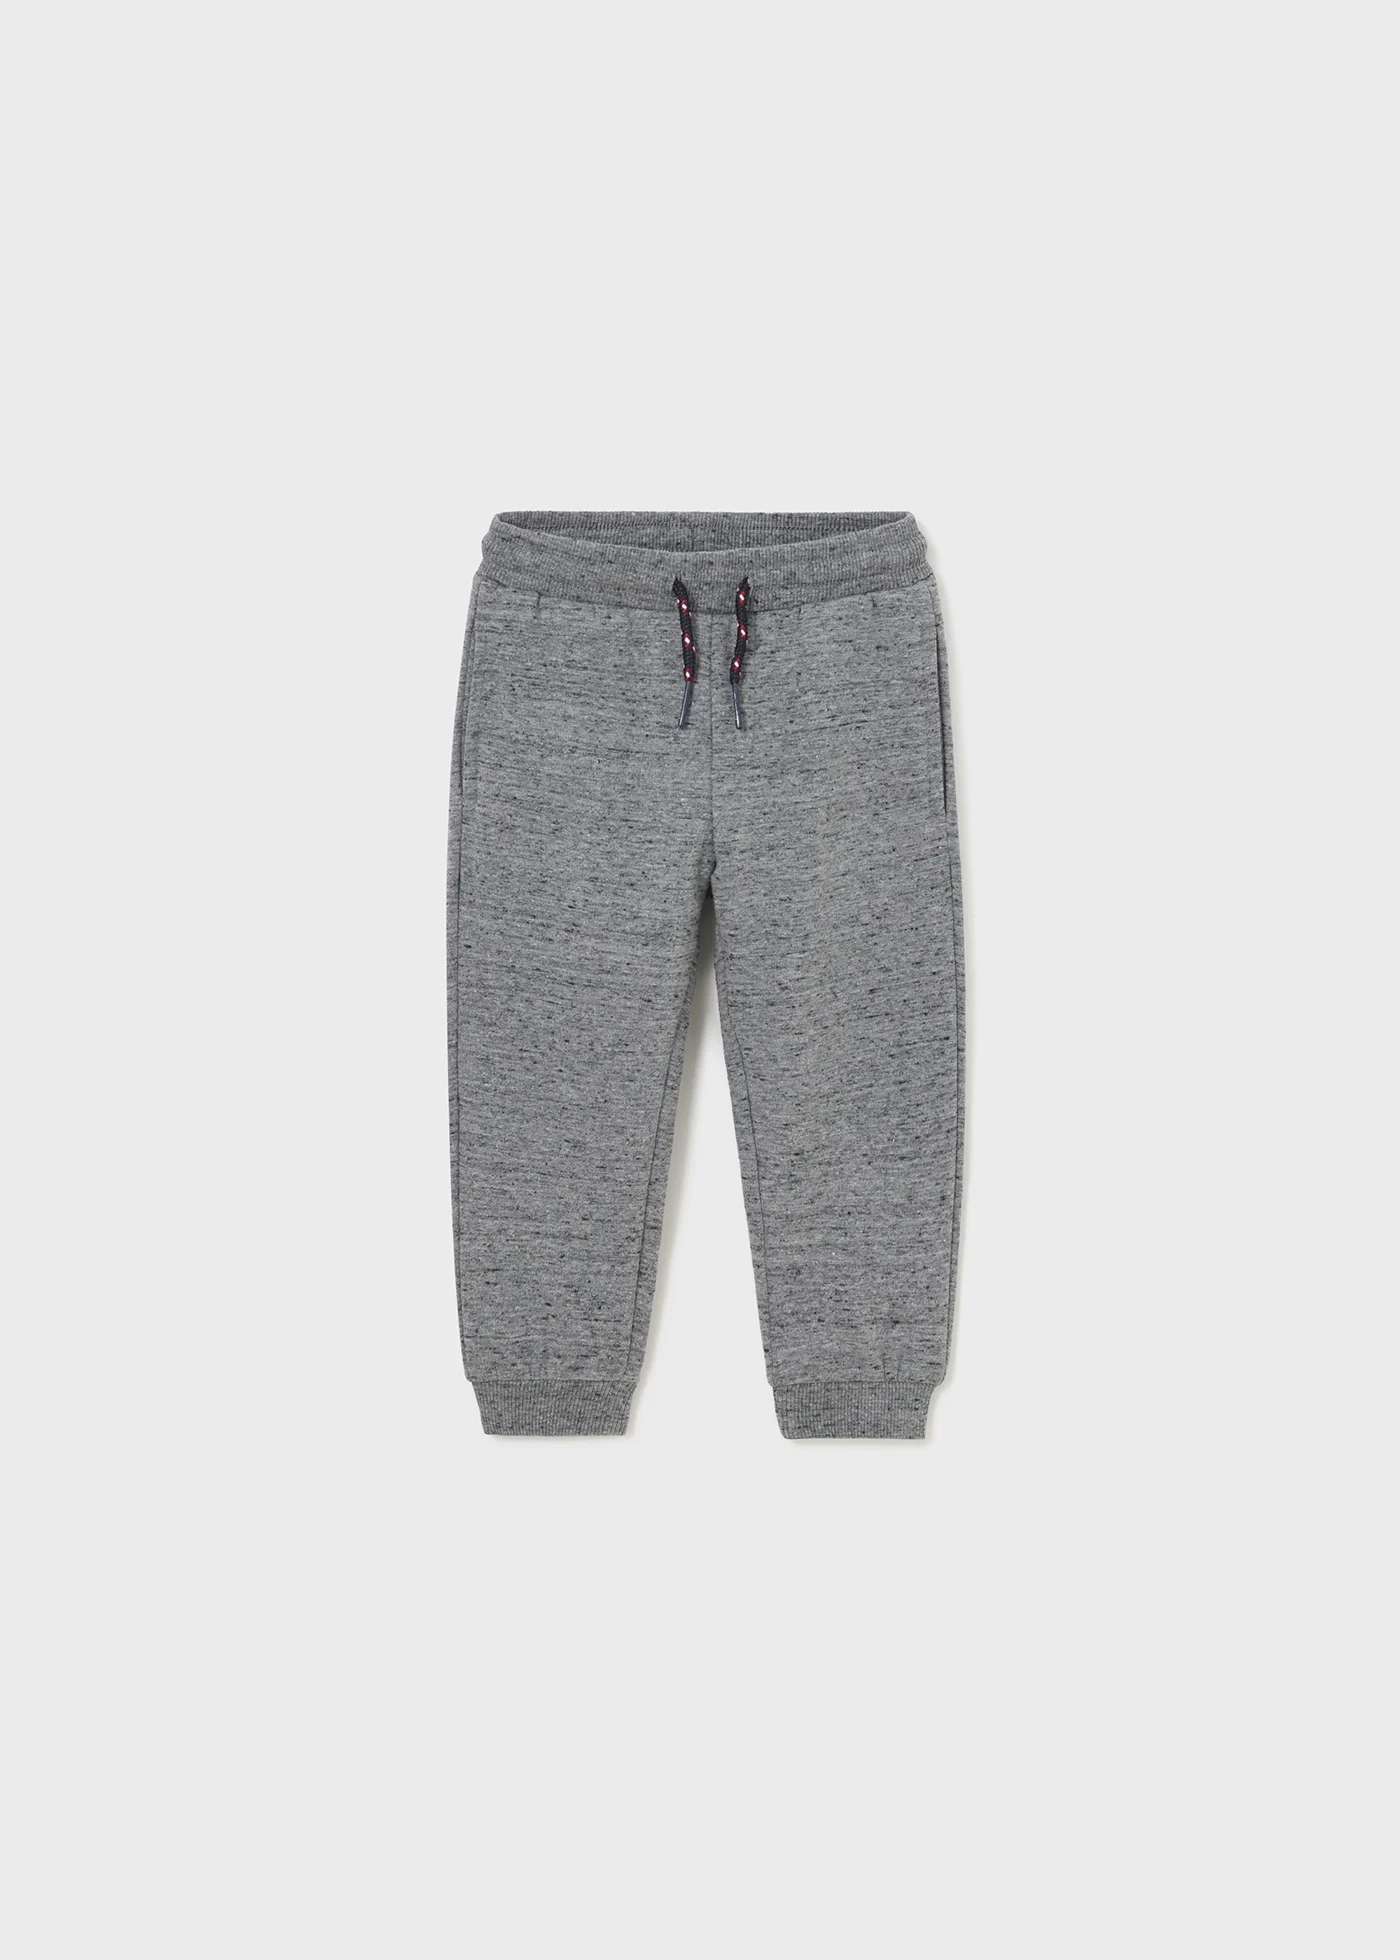 Mayoral Basic Cuffed Fleece Joggers Style 704 - Fossil